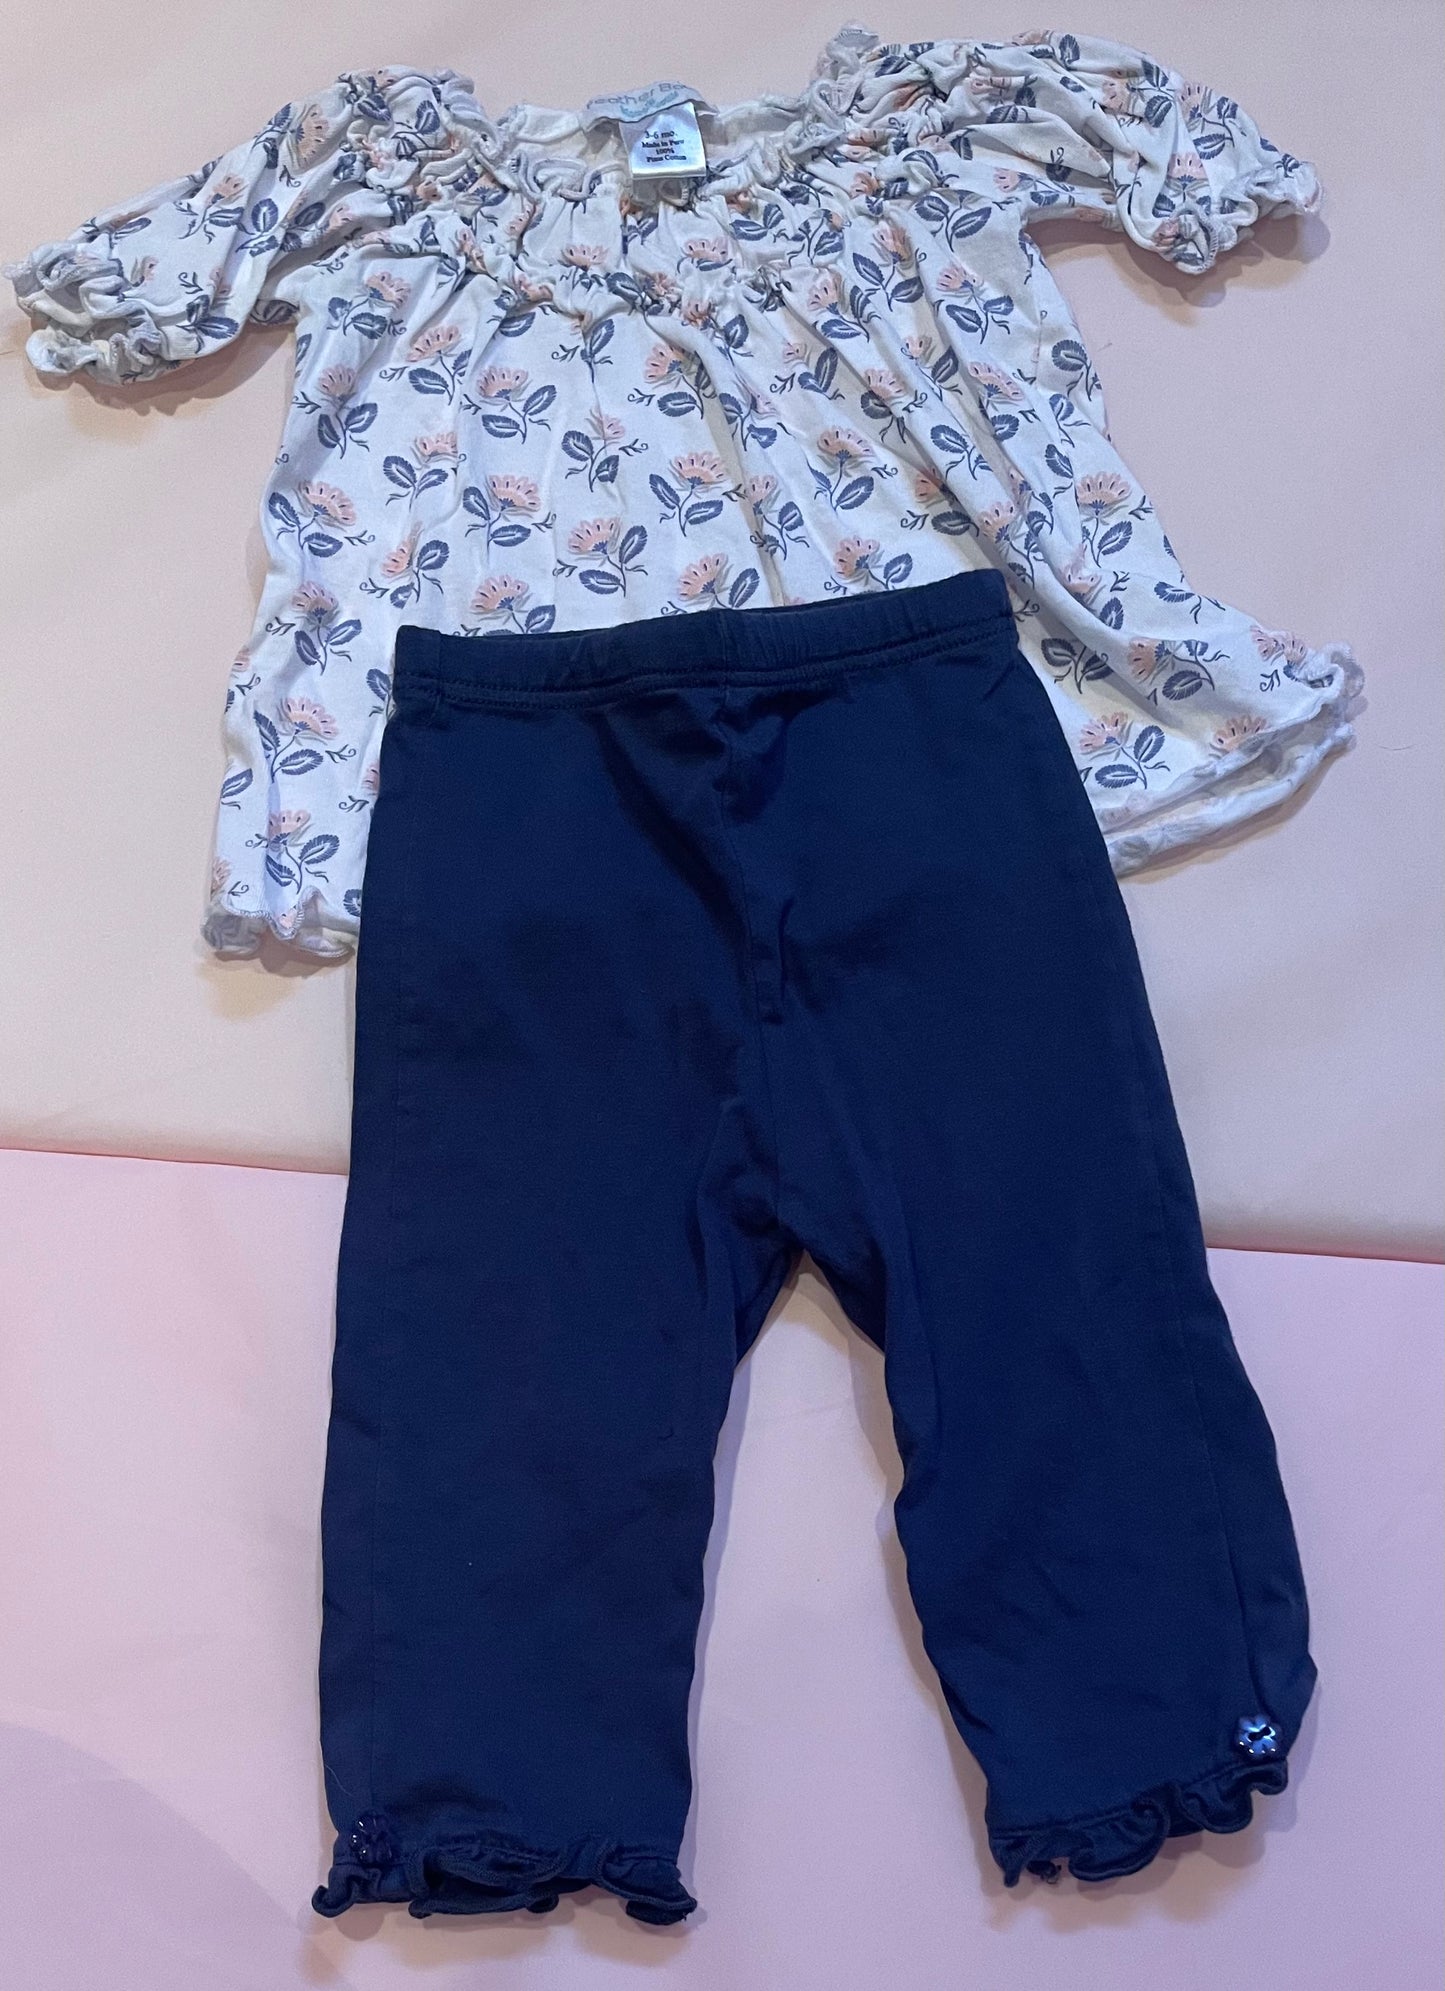 Size 3-6 mo. Outfit.